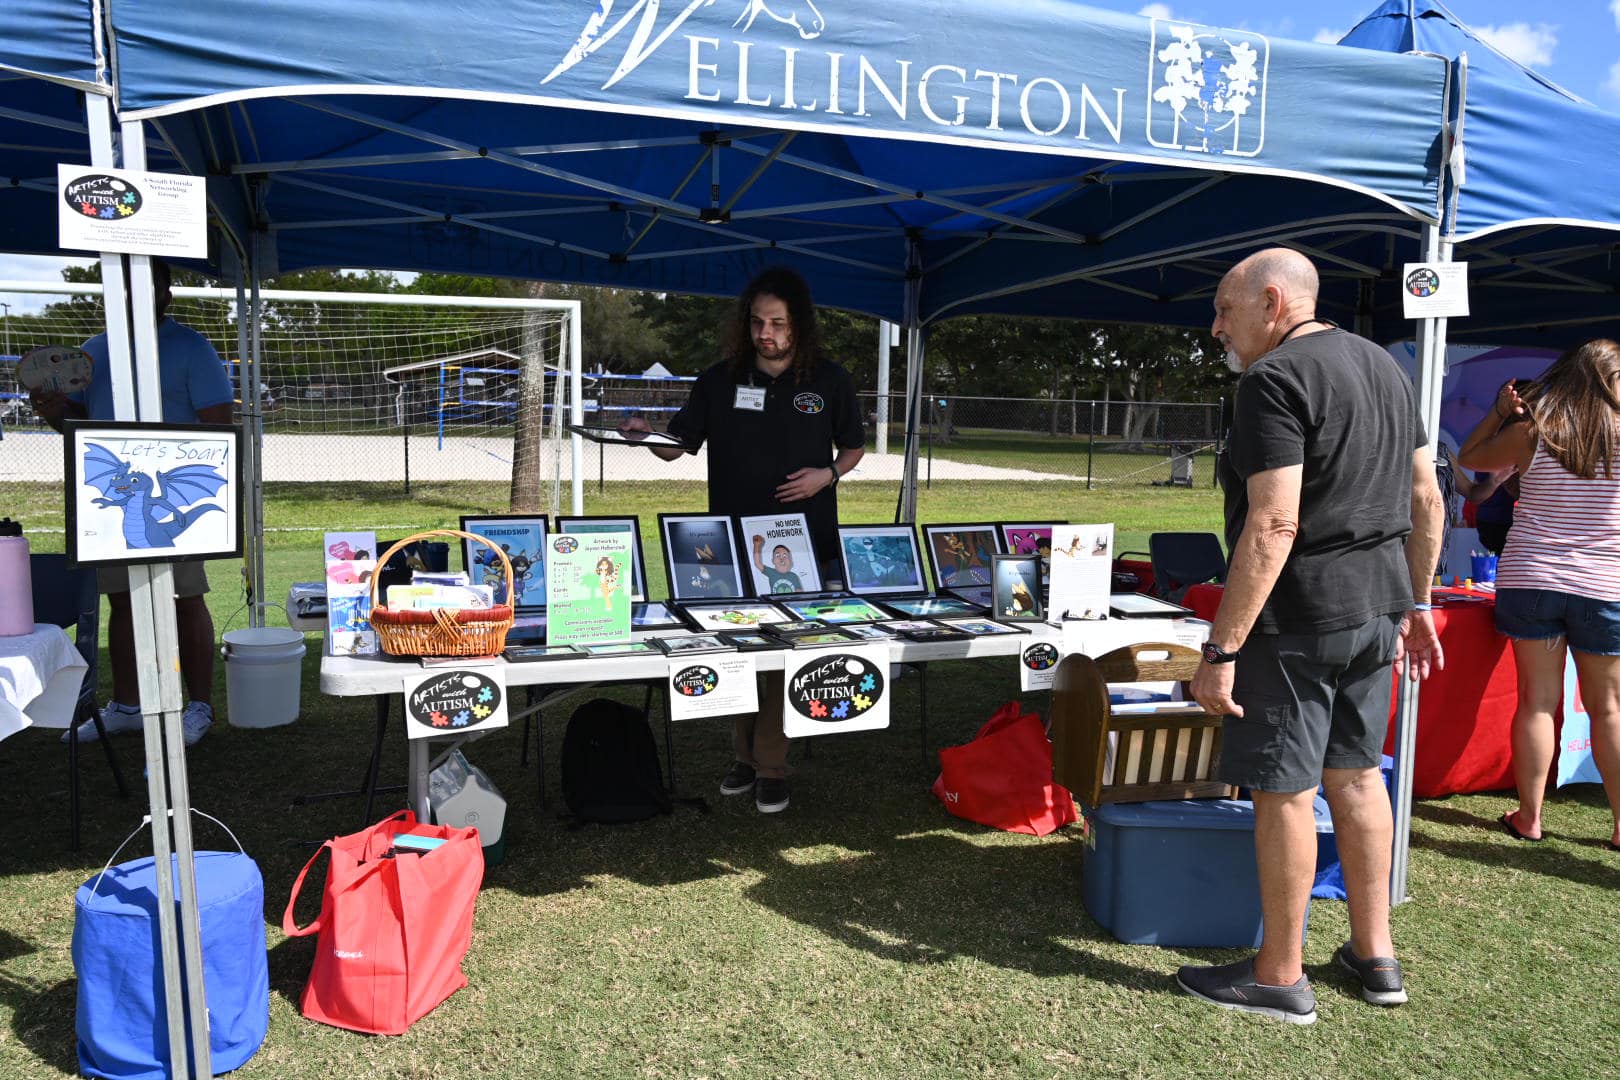 We had an amazing time at the Day For Autism event in Wellington. We thank all families who came out and joined us.